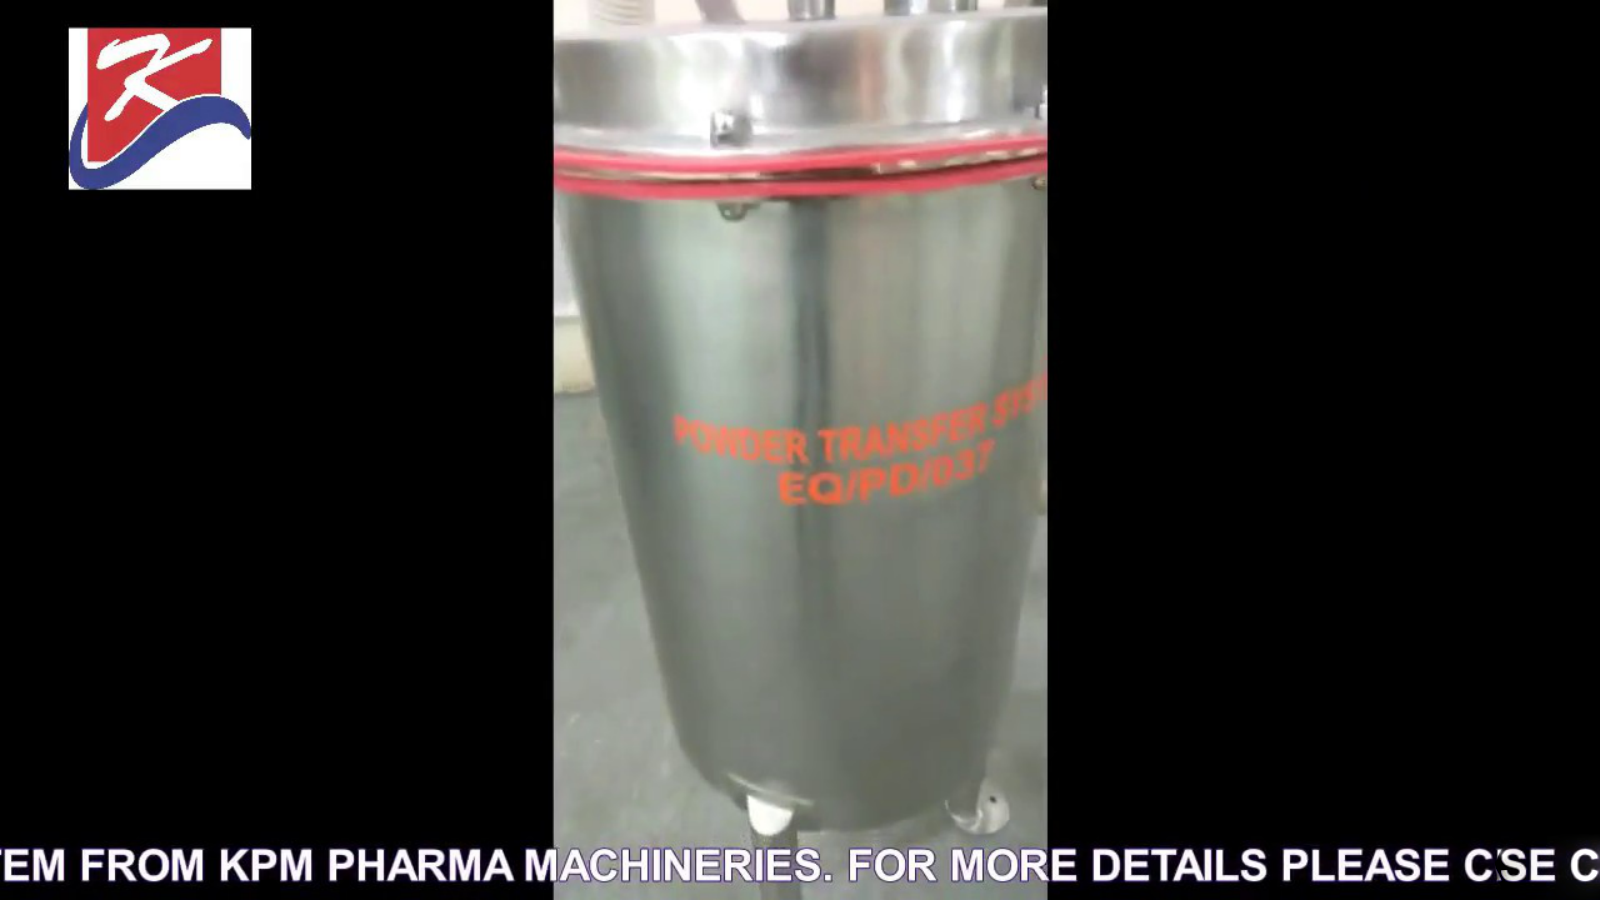 Octagonal Blender with Vacuum Powder Transfer System From KPM Pharma Machineries